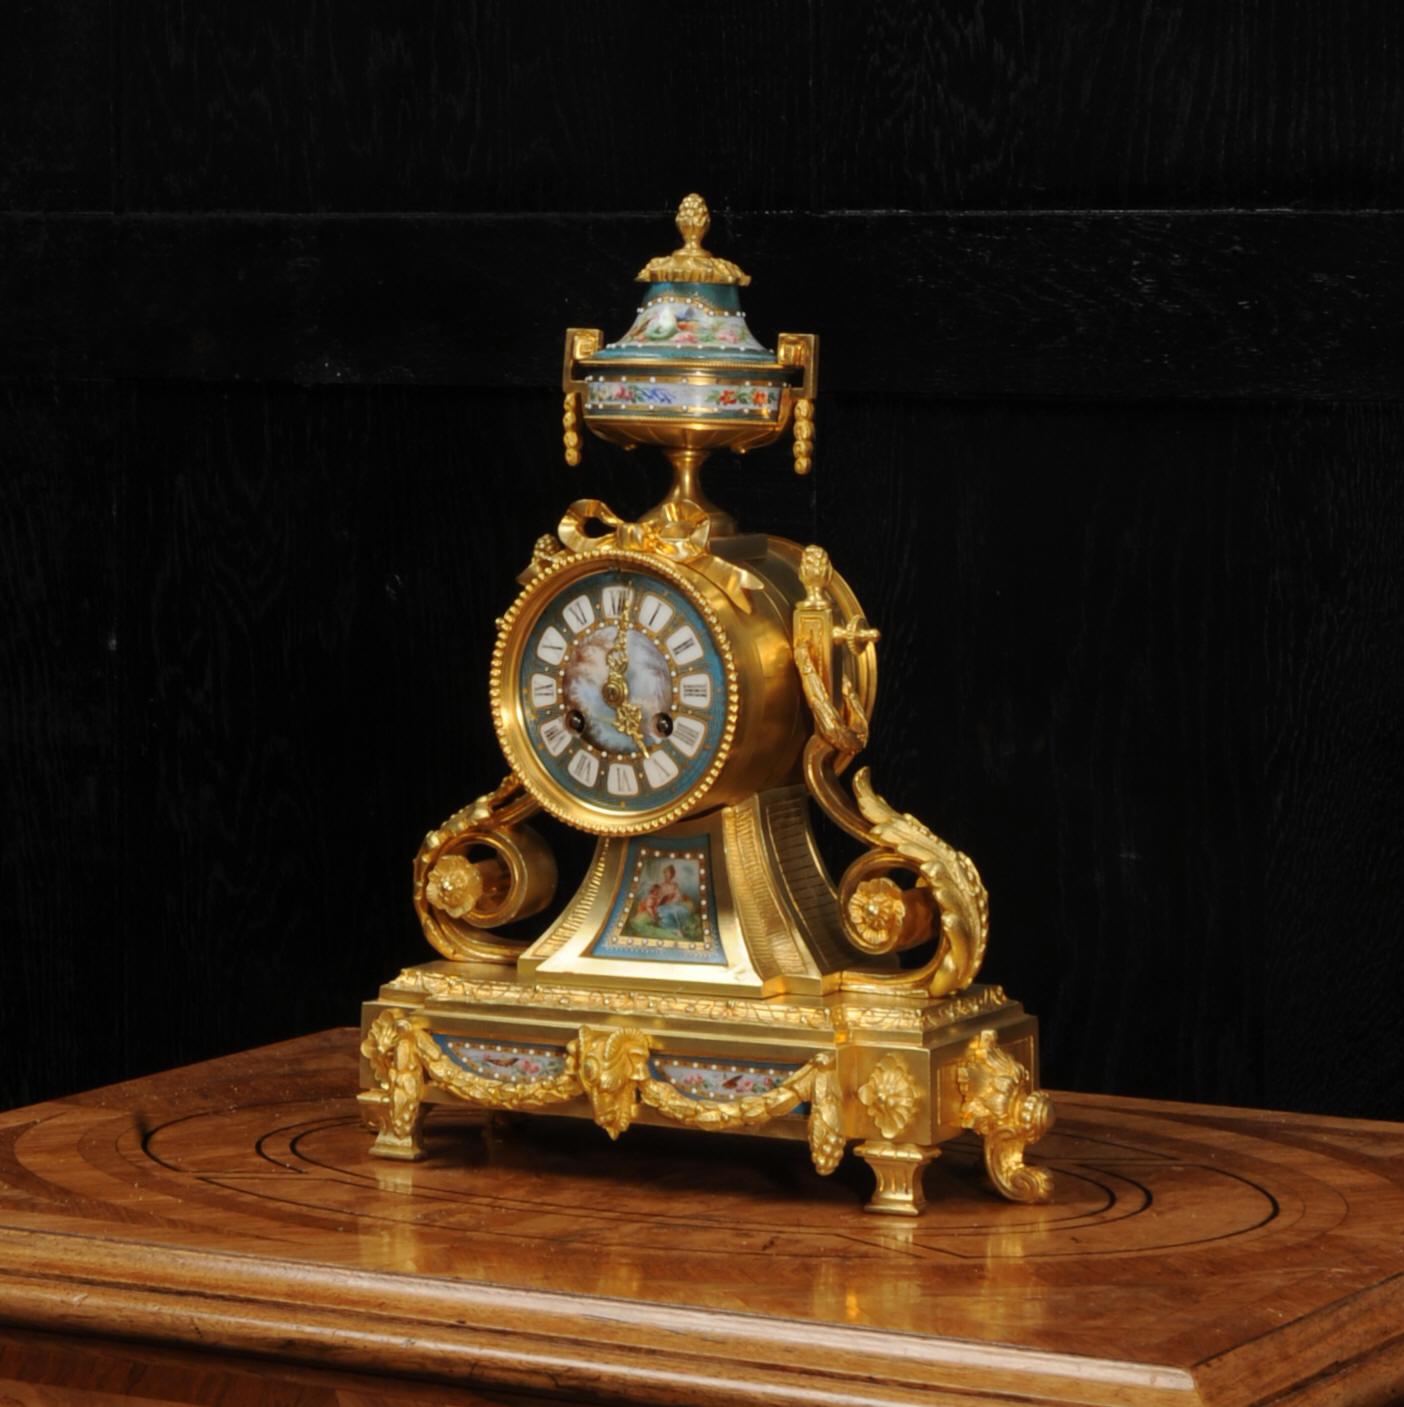 19th Century Ormolu and Sevres Porcelain Antique French Clock by Le Roy et Fils